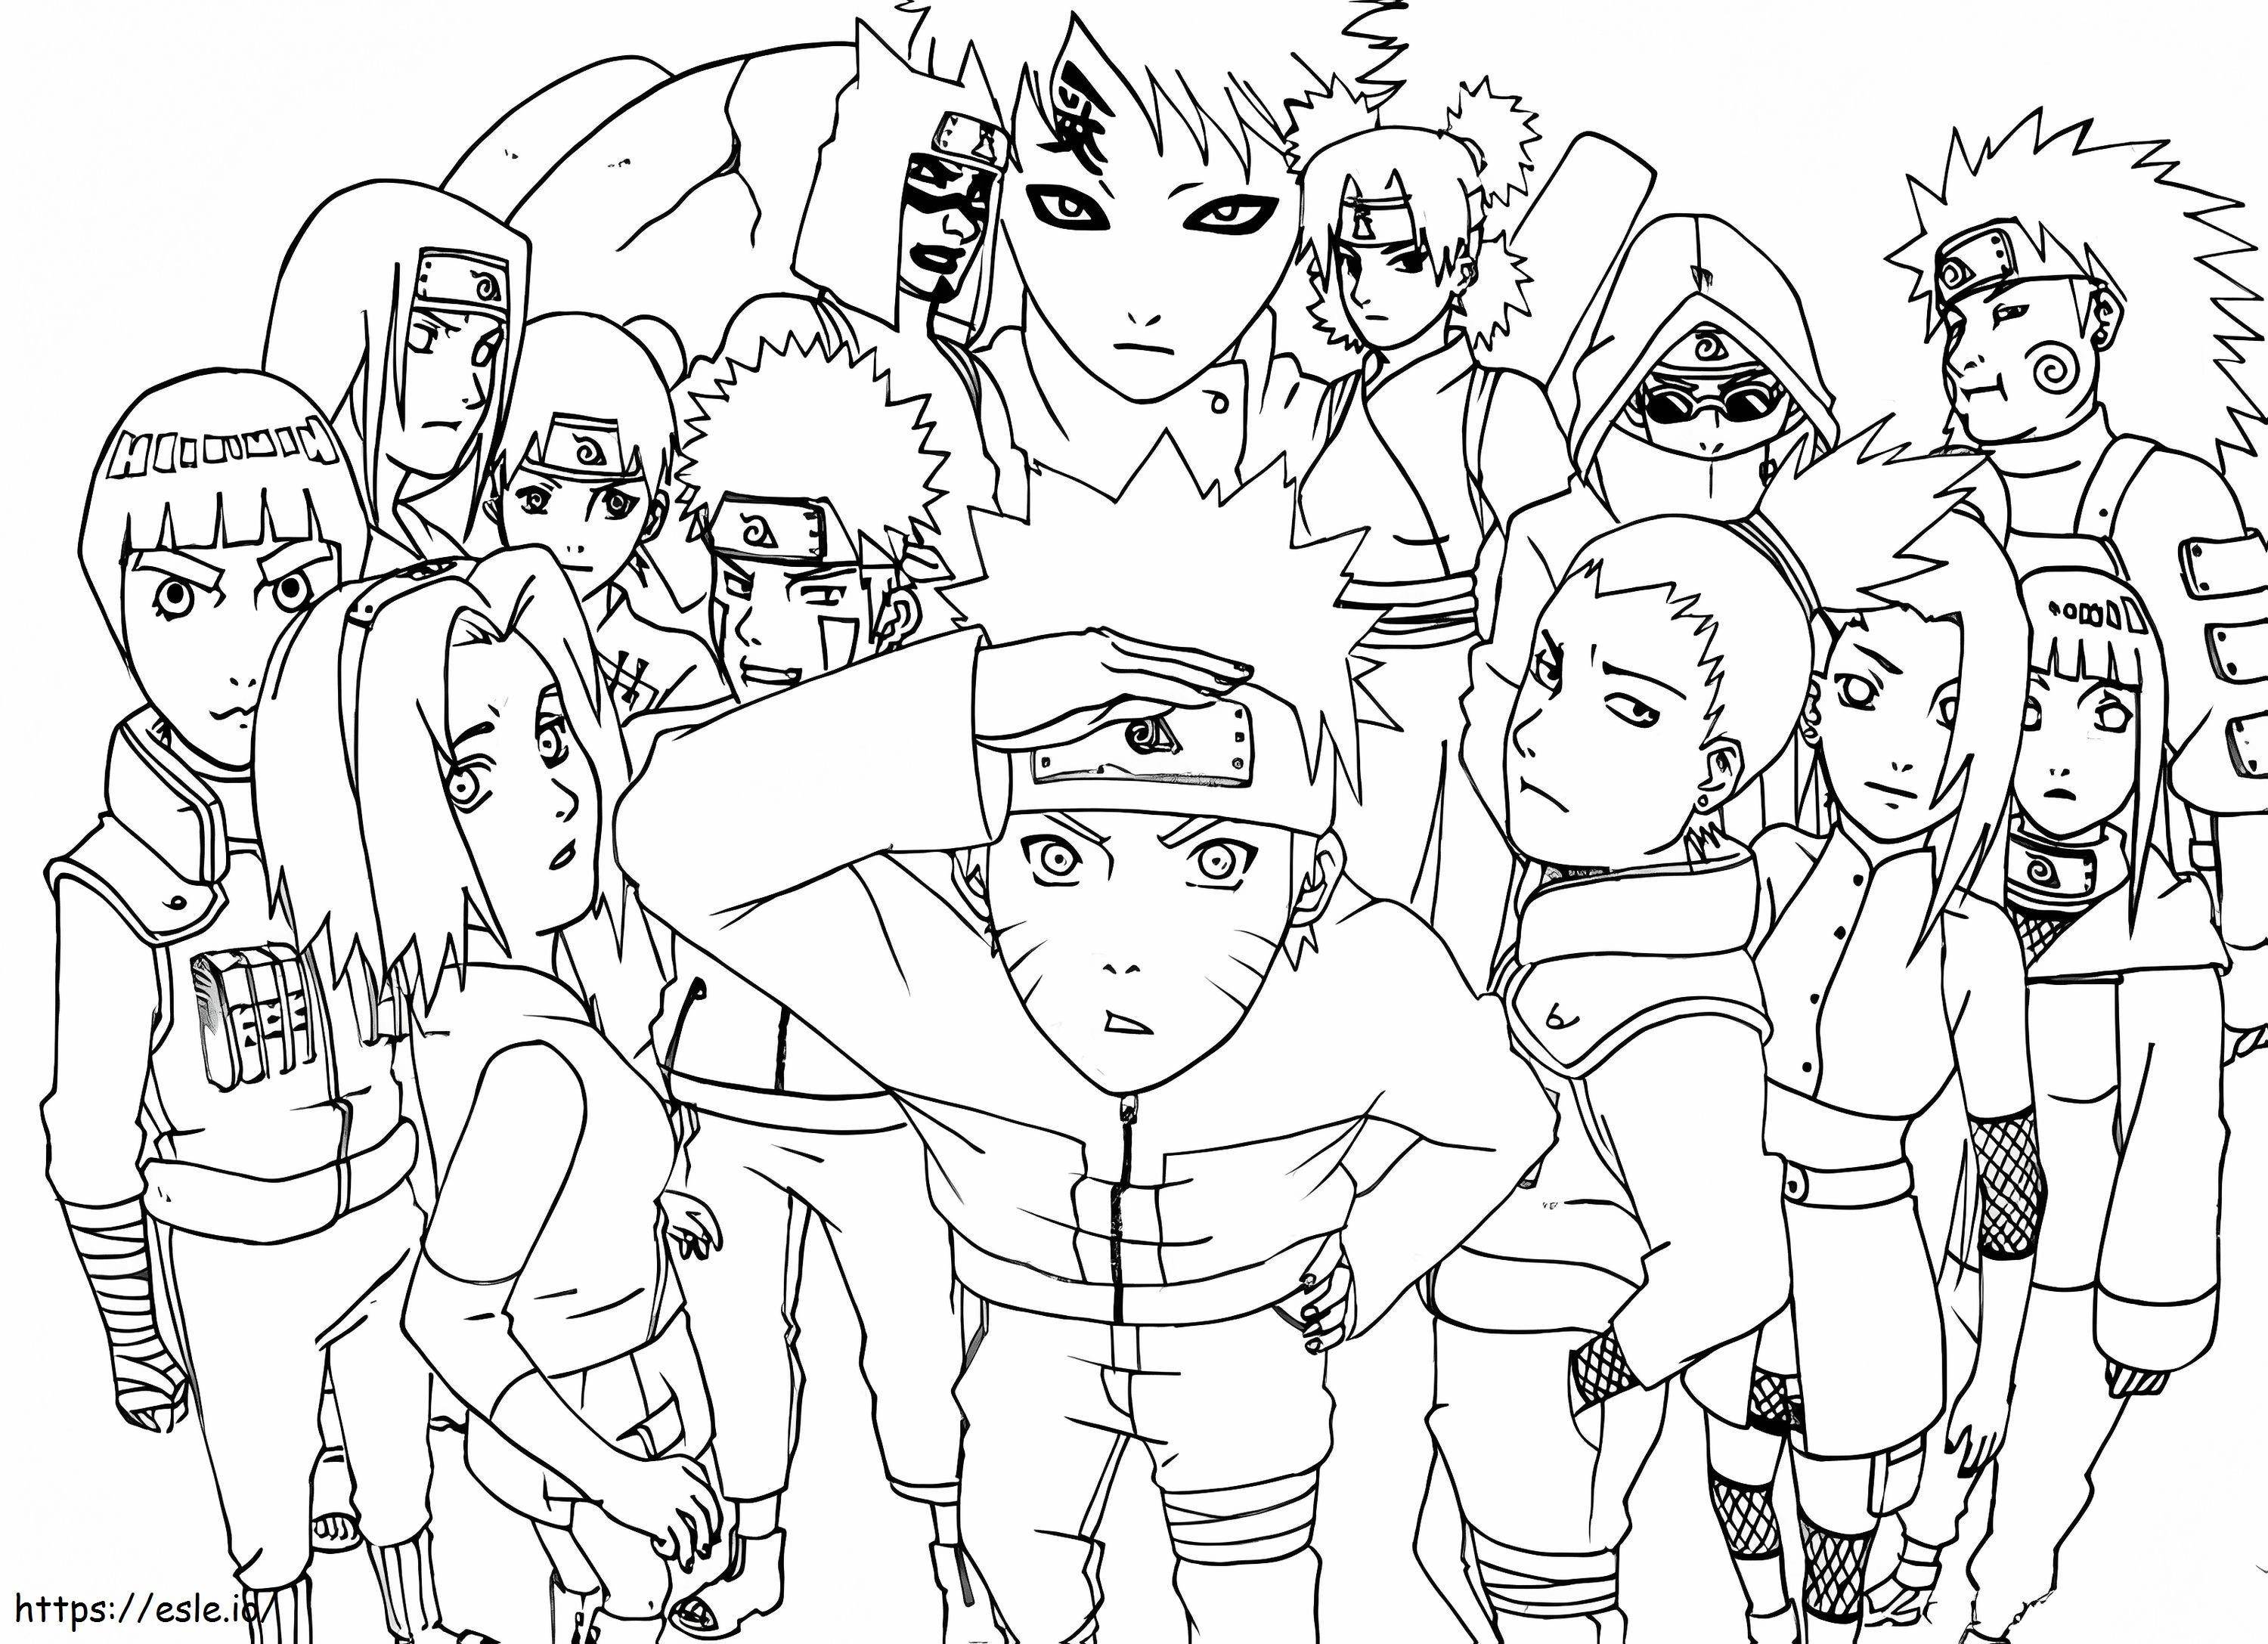 Naruto Shippuden All Characters Coloring4Free.Com_ coloring page